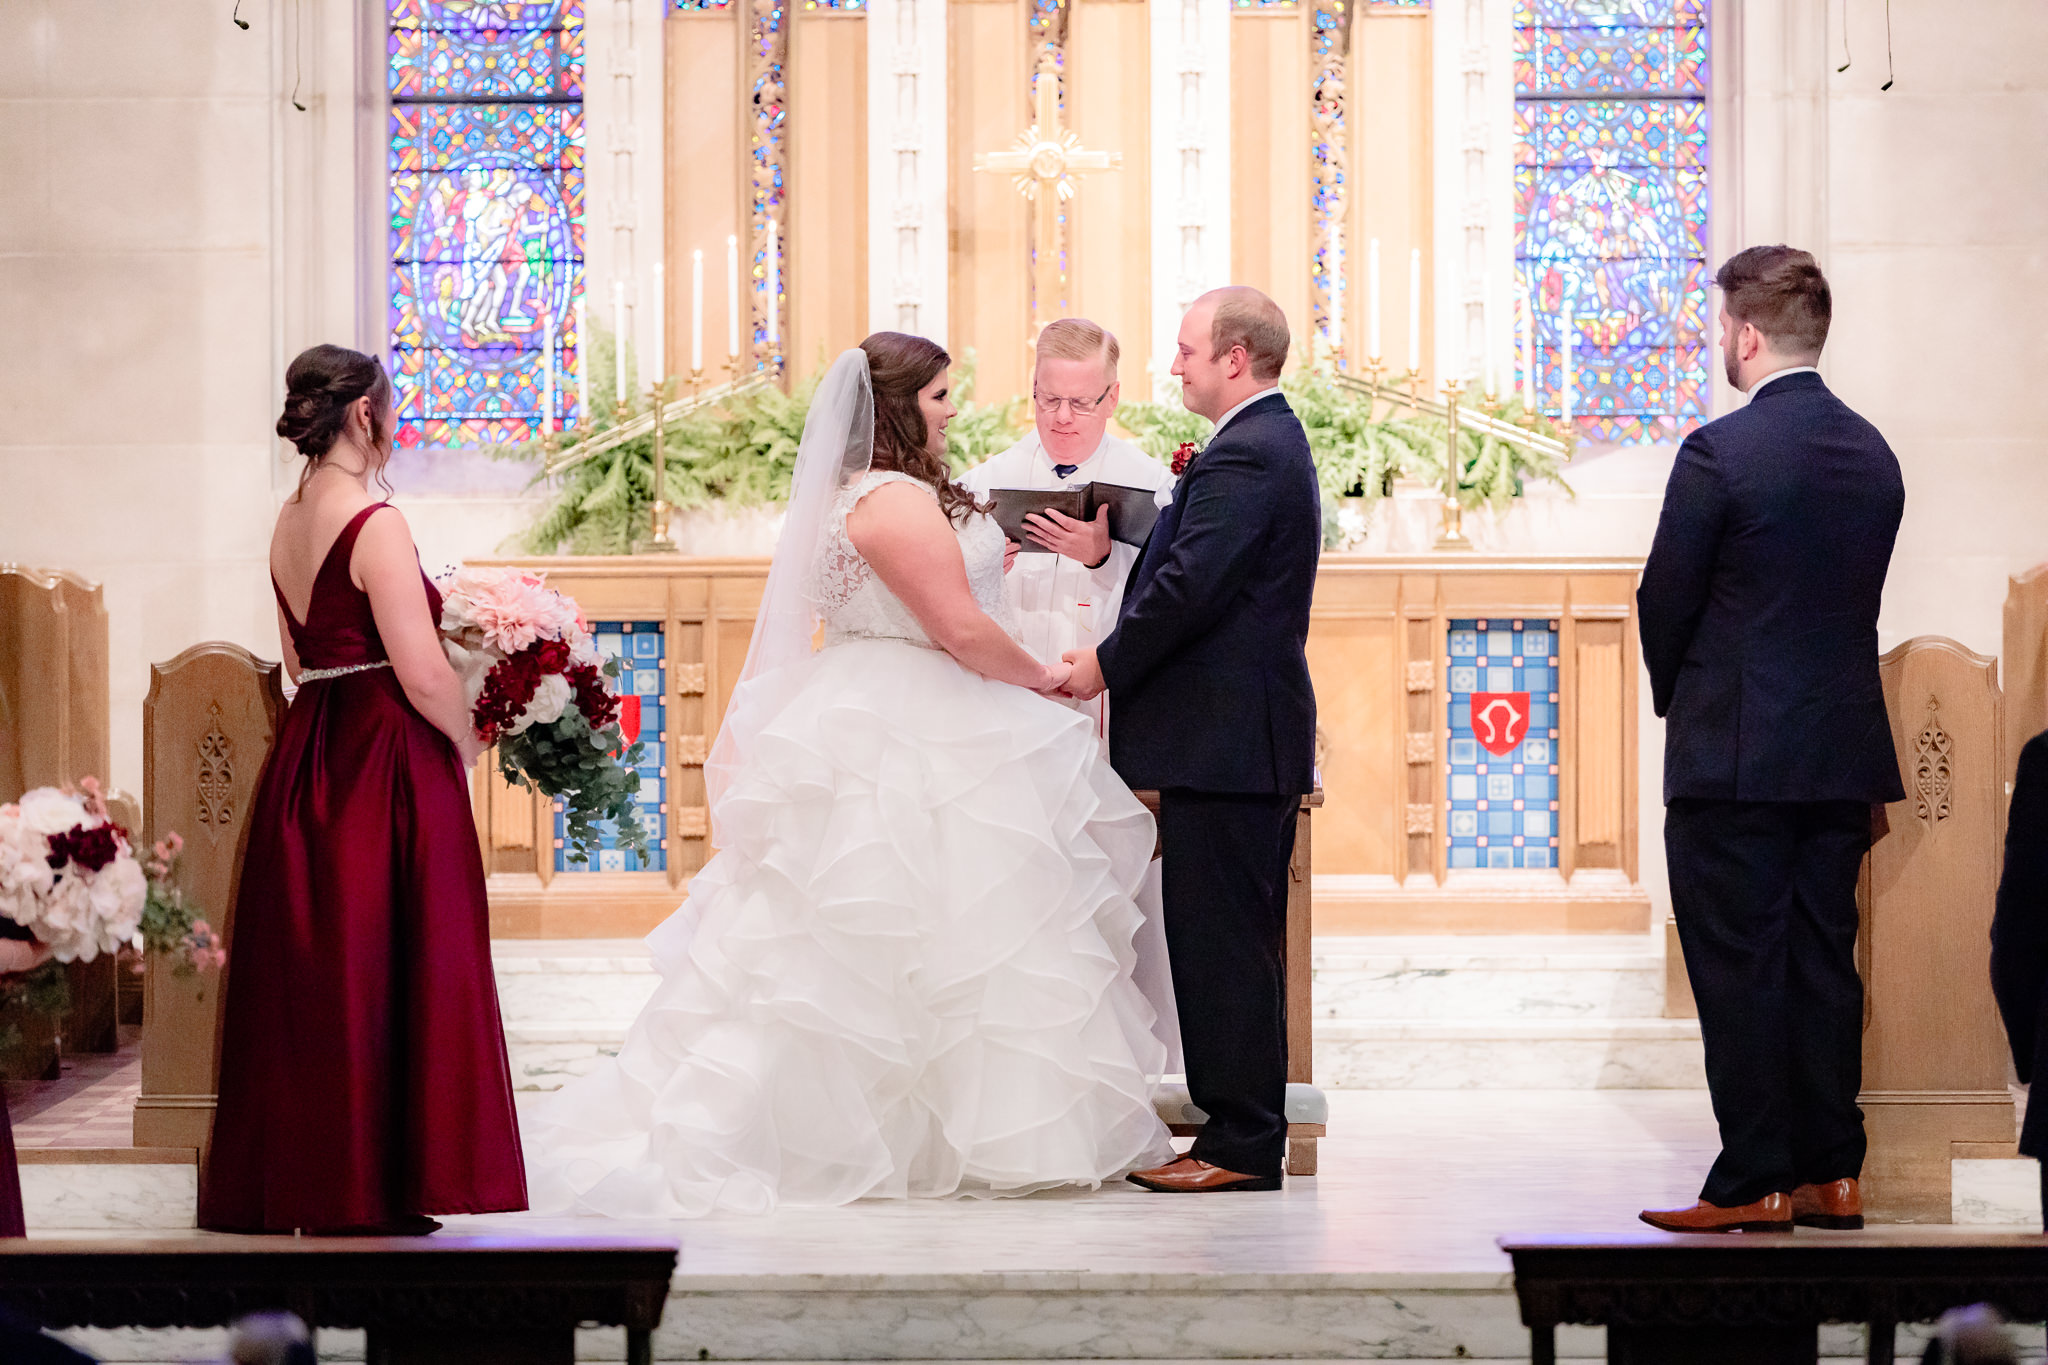 The bride and groom hold hands as they recite their vows at Mt. Lebanon United Methodist Church